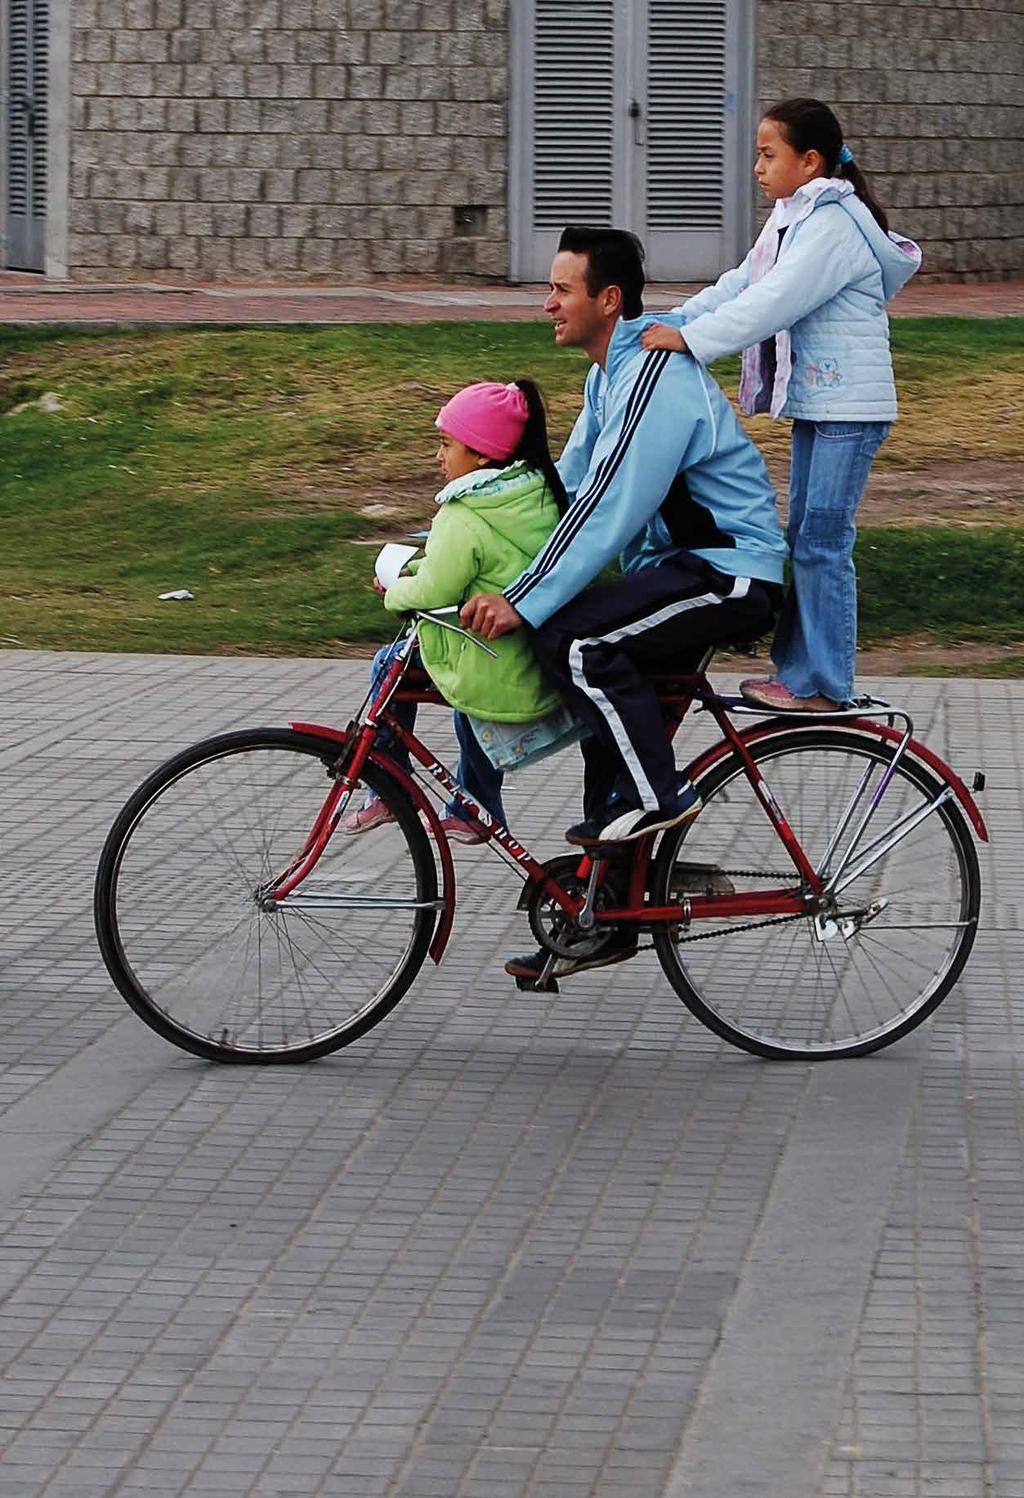 The Bogotá 2014 Bicycle Account provides timely data about the state of bicycle infrastructure and use in Bogotá, as well as the results of survey data on popular perceptions of bicycle use.